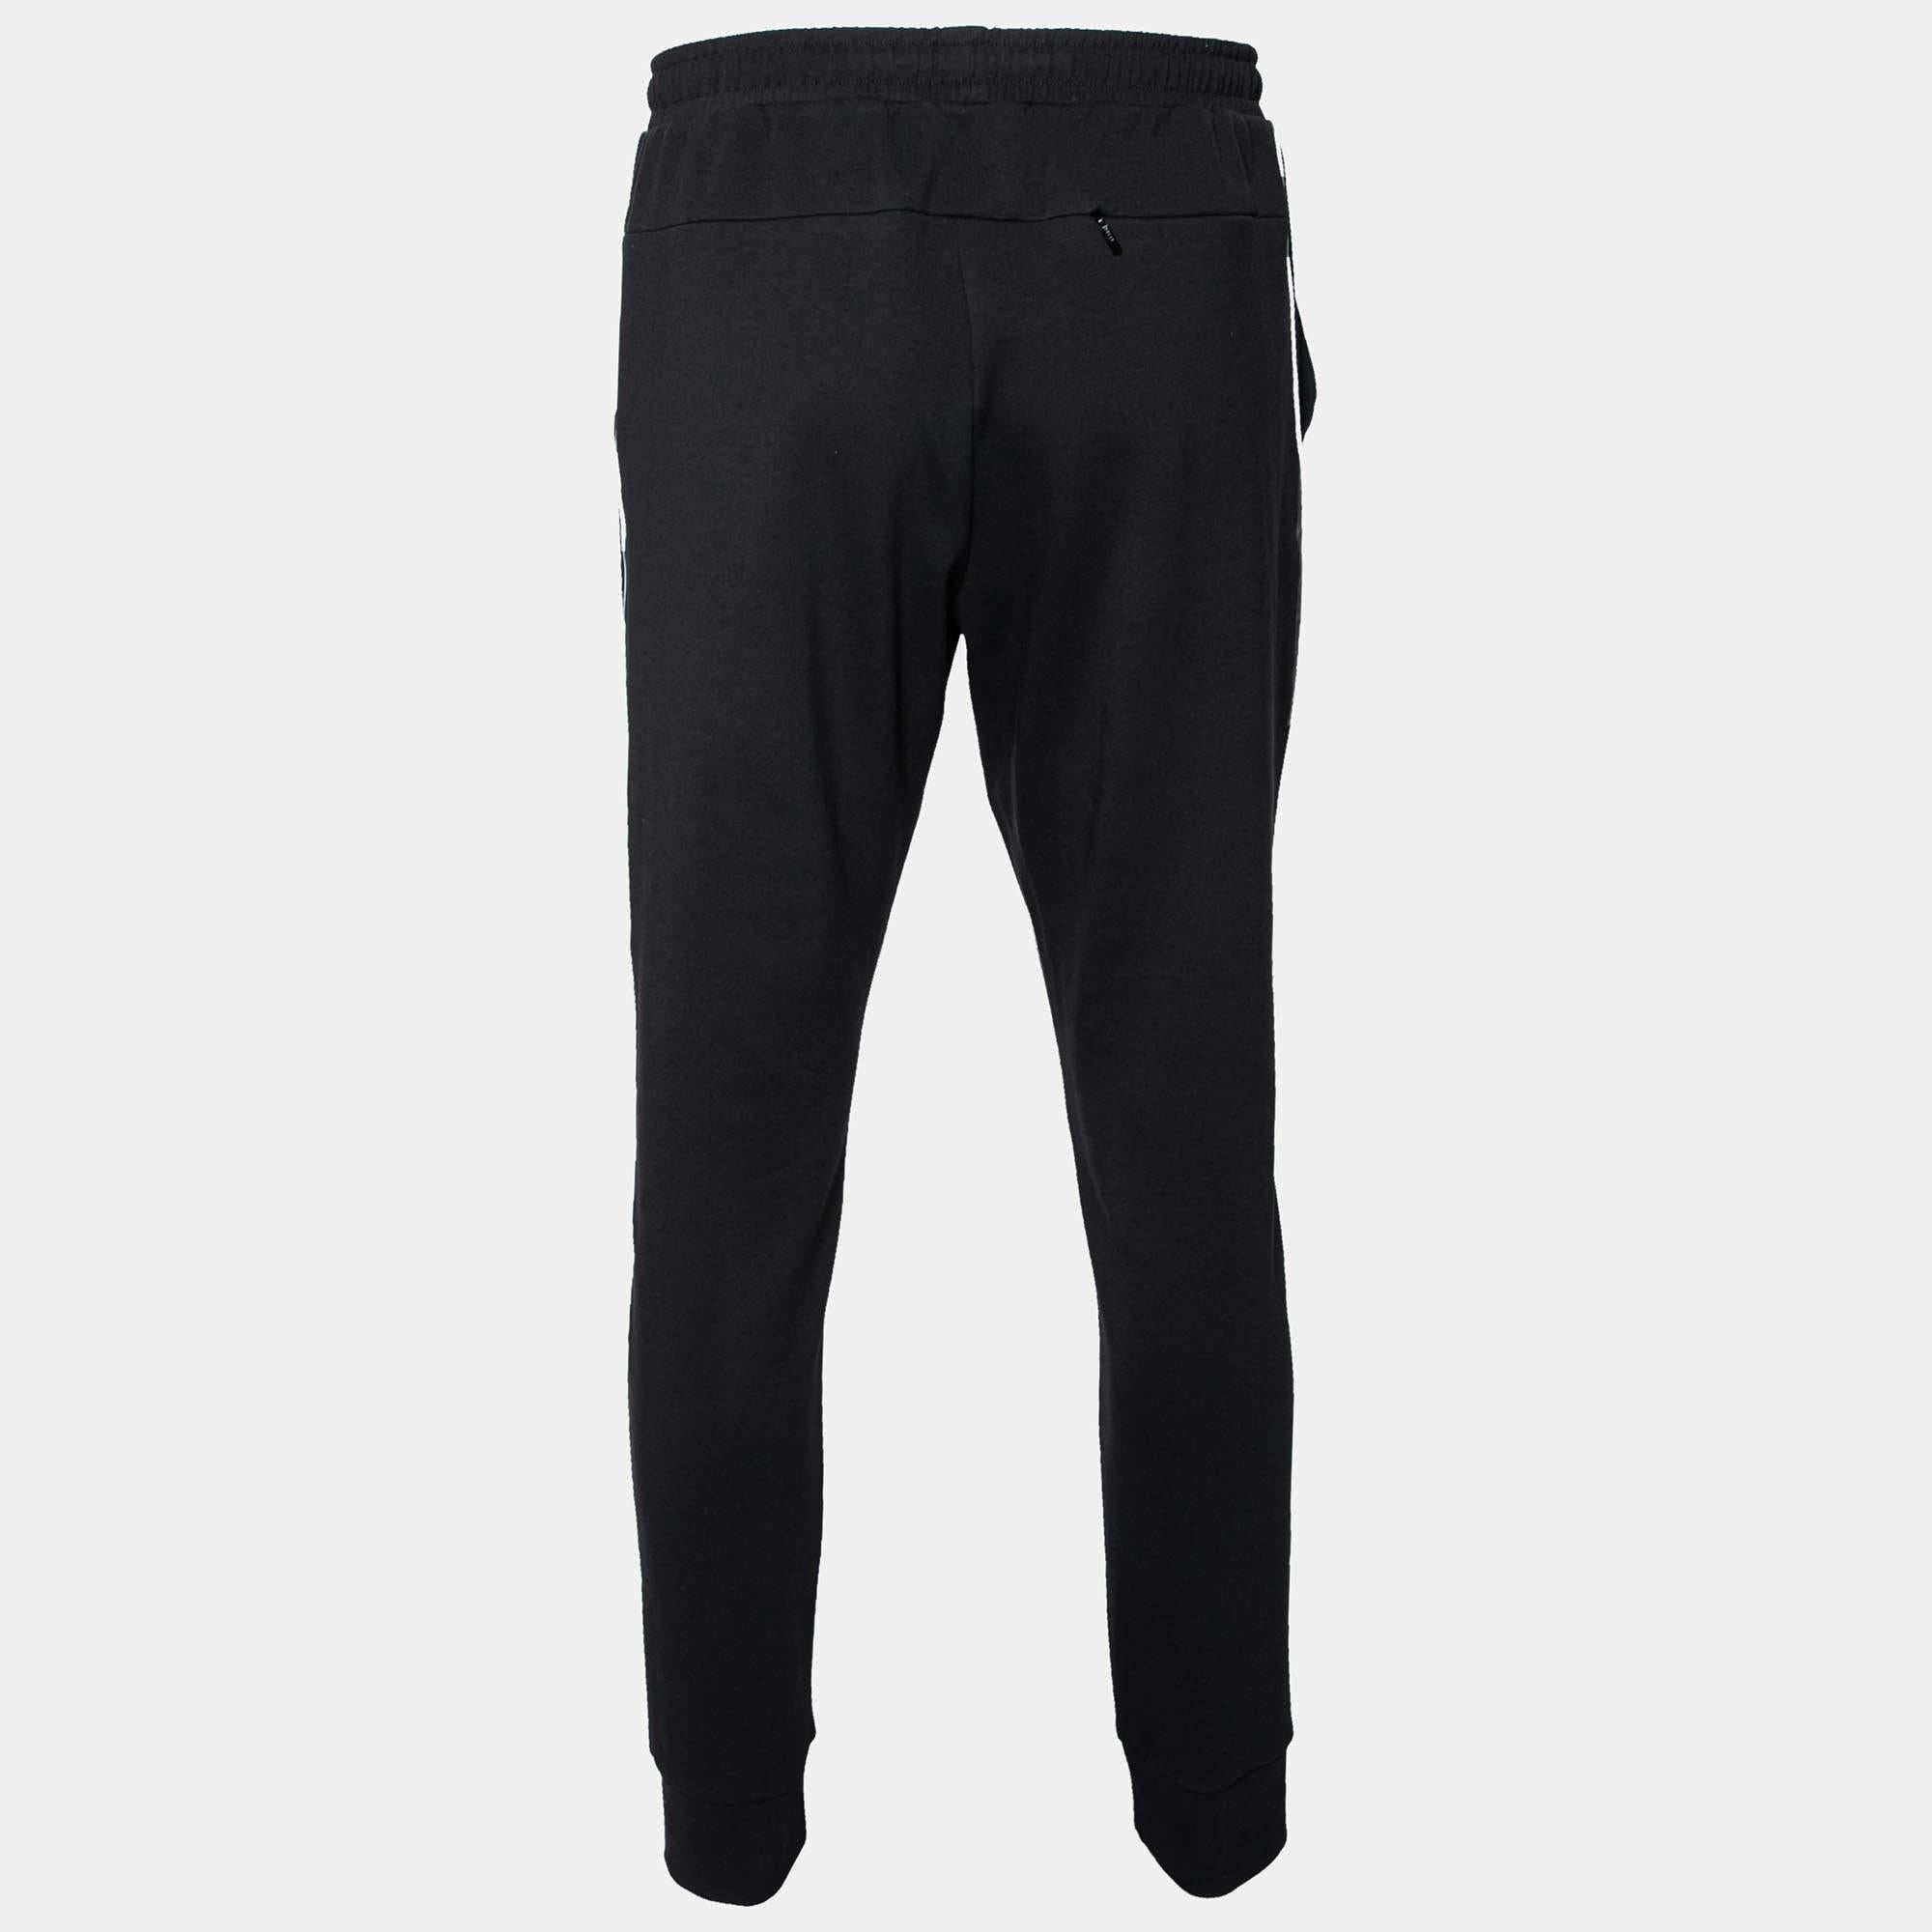 Feel comfortable and look stylish all day with these Fendi track pants. They have been crafted from quality fabrics and the creation is highlighted with logo details and the elasticated waistband ensures a perfect fit.

